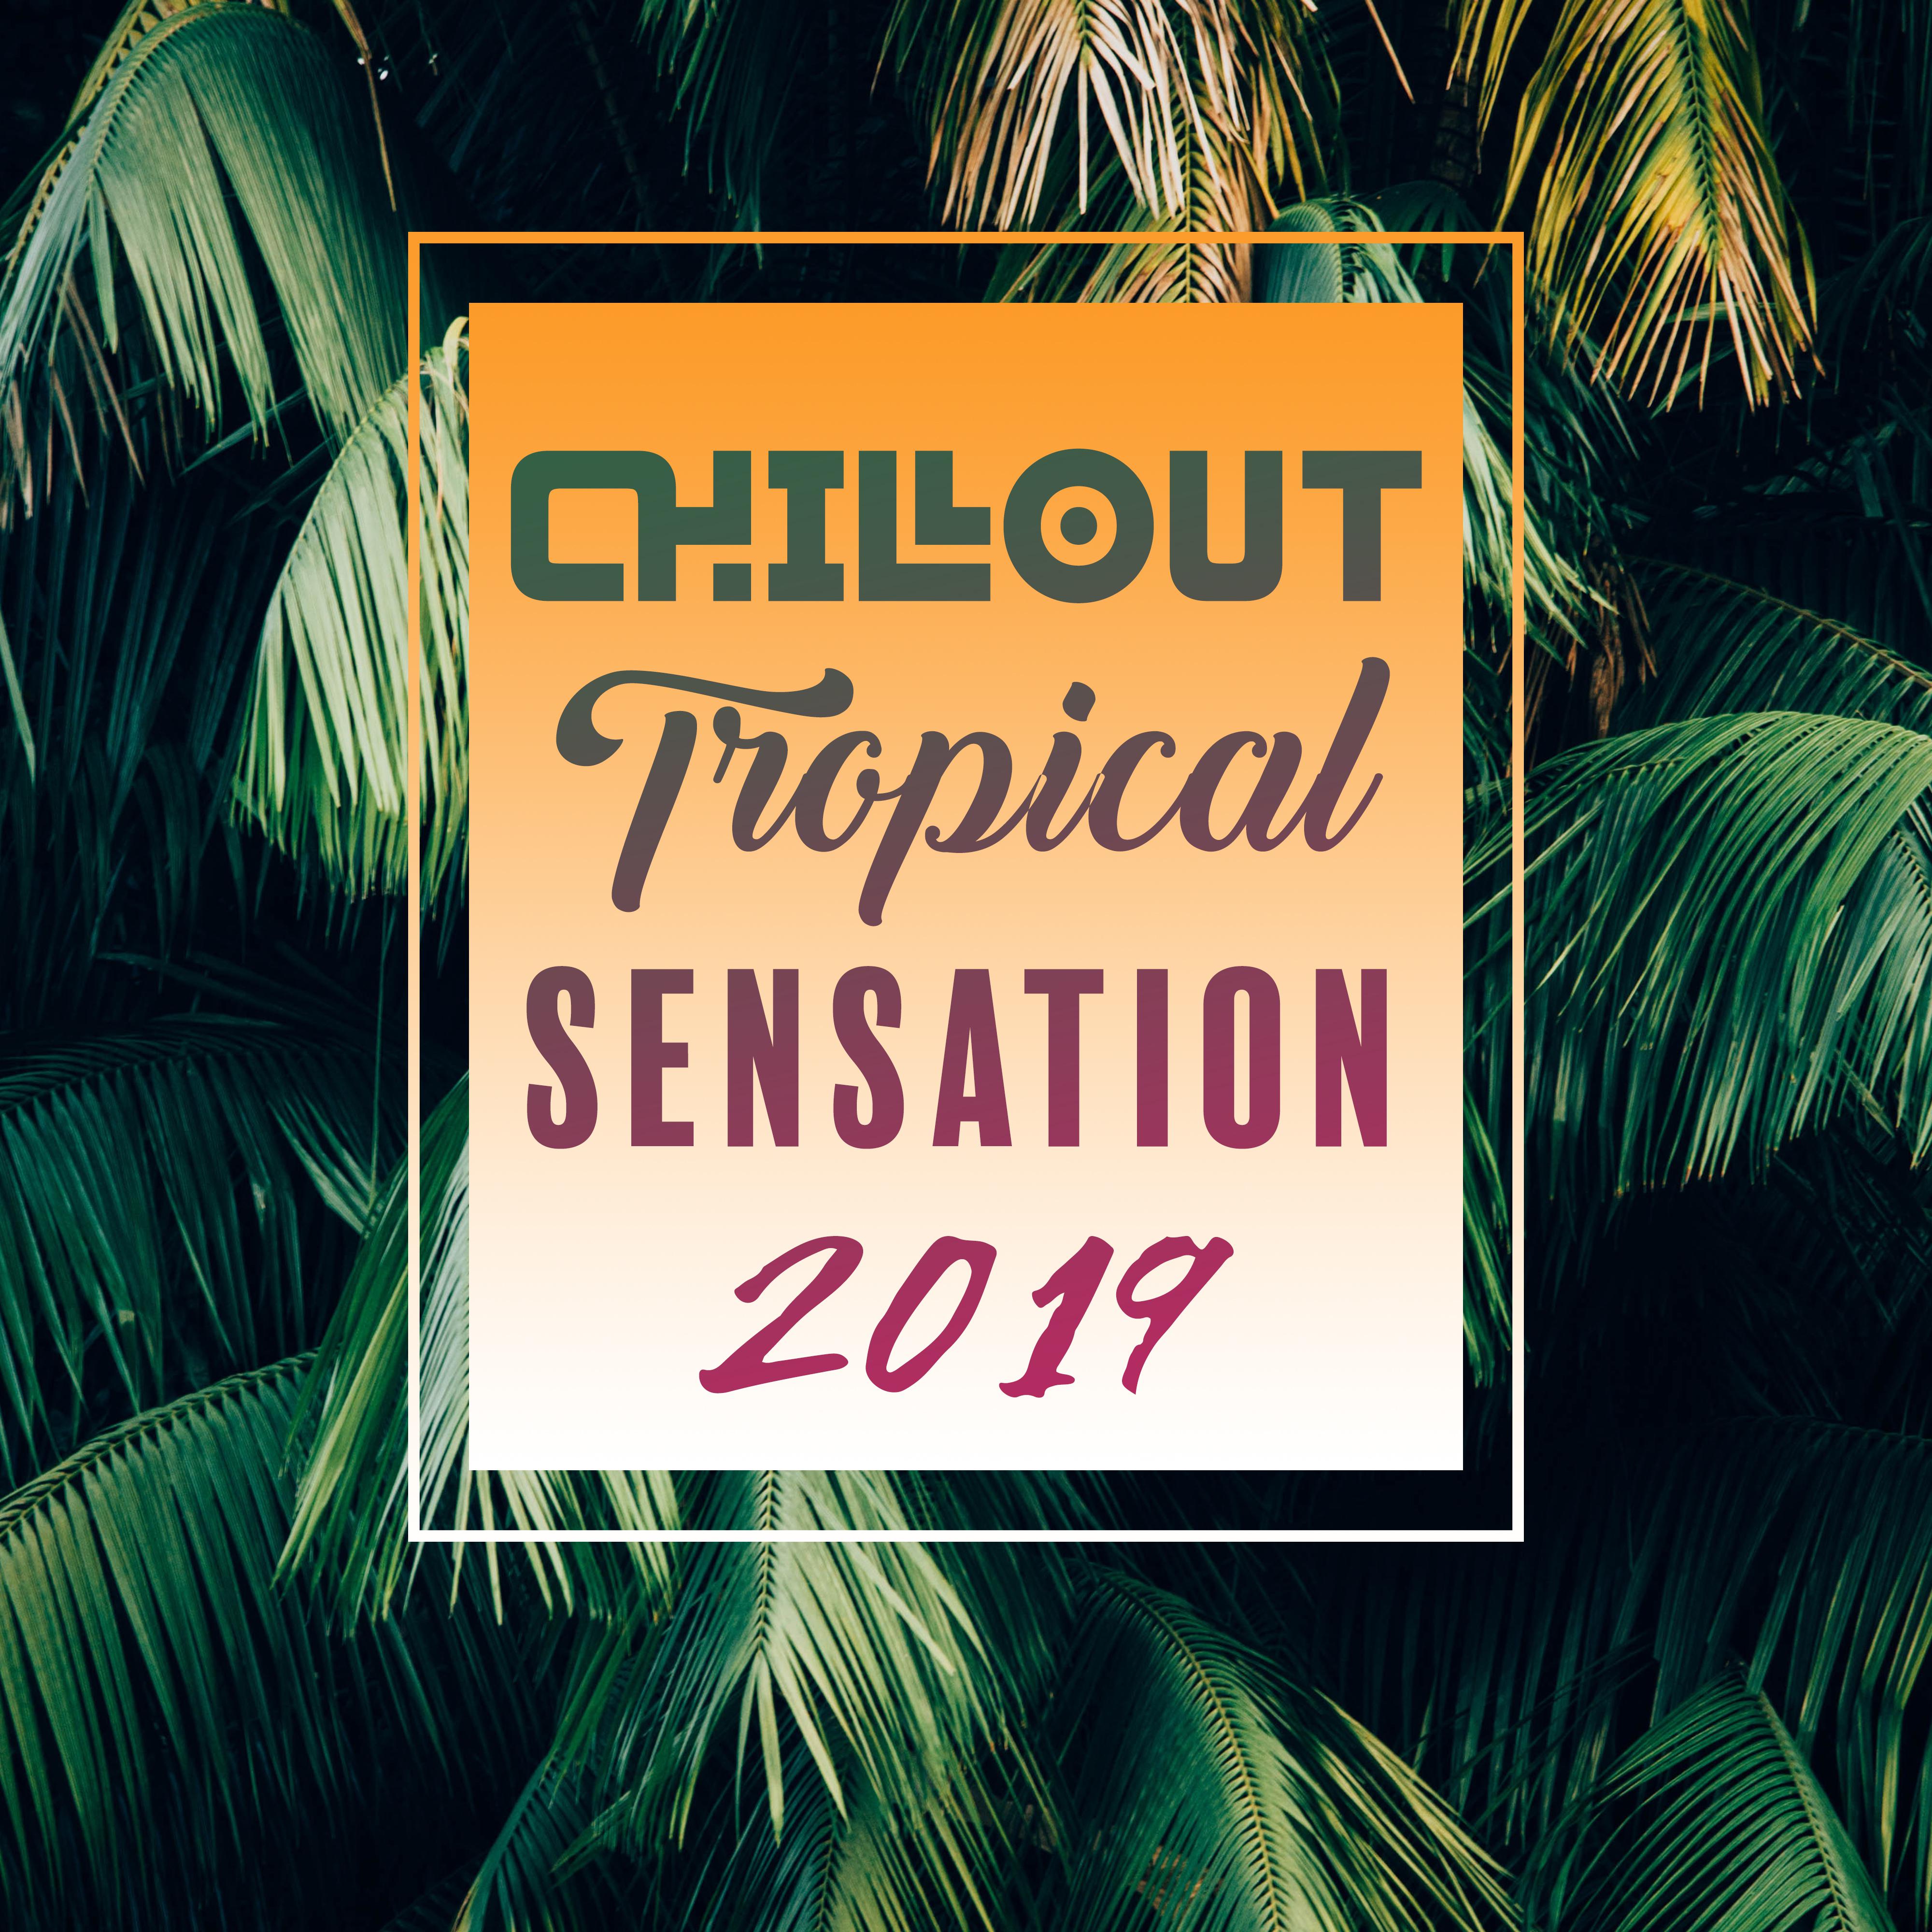 Chillout Tropical Sensation 2019  Selection of Most Relaxing Top Chill Out Music, Vacation Beats, Beach Time Under The Palms, Positive Vibes, Summer Beach Bar